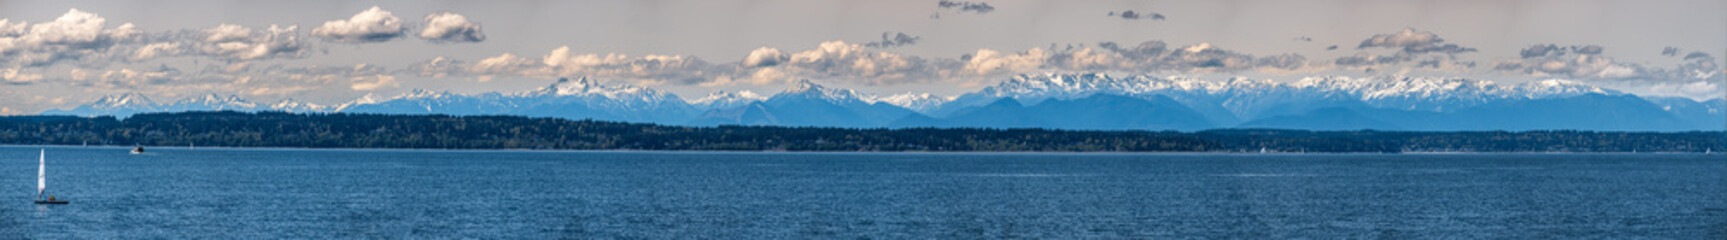 A panorama of the Olympic Mountain range seen across from Puget Sound on a sunny day